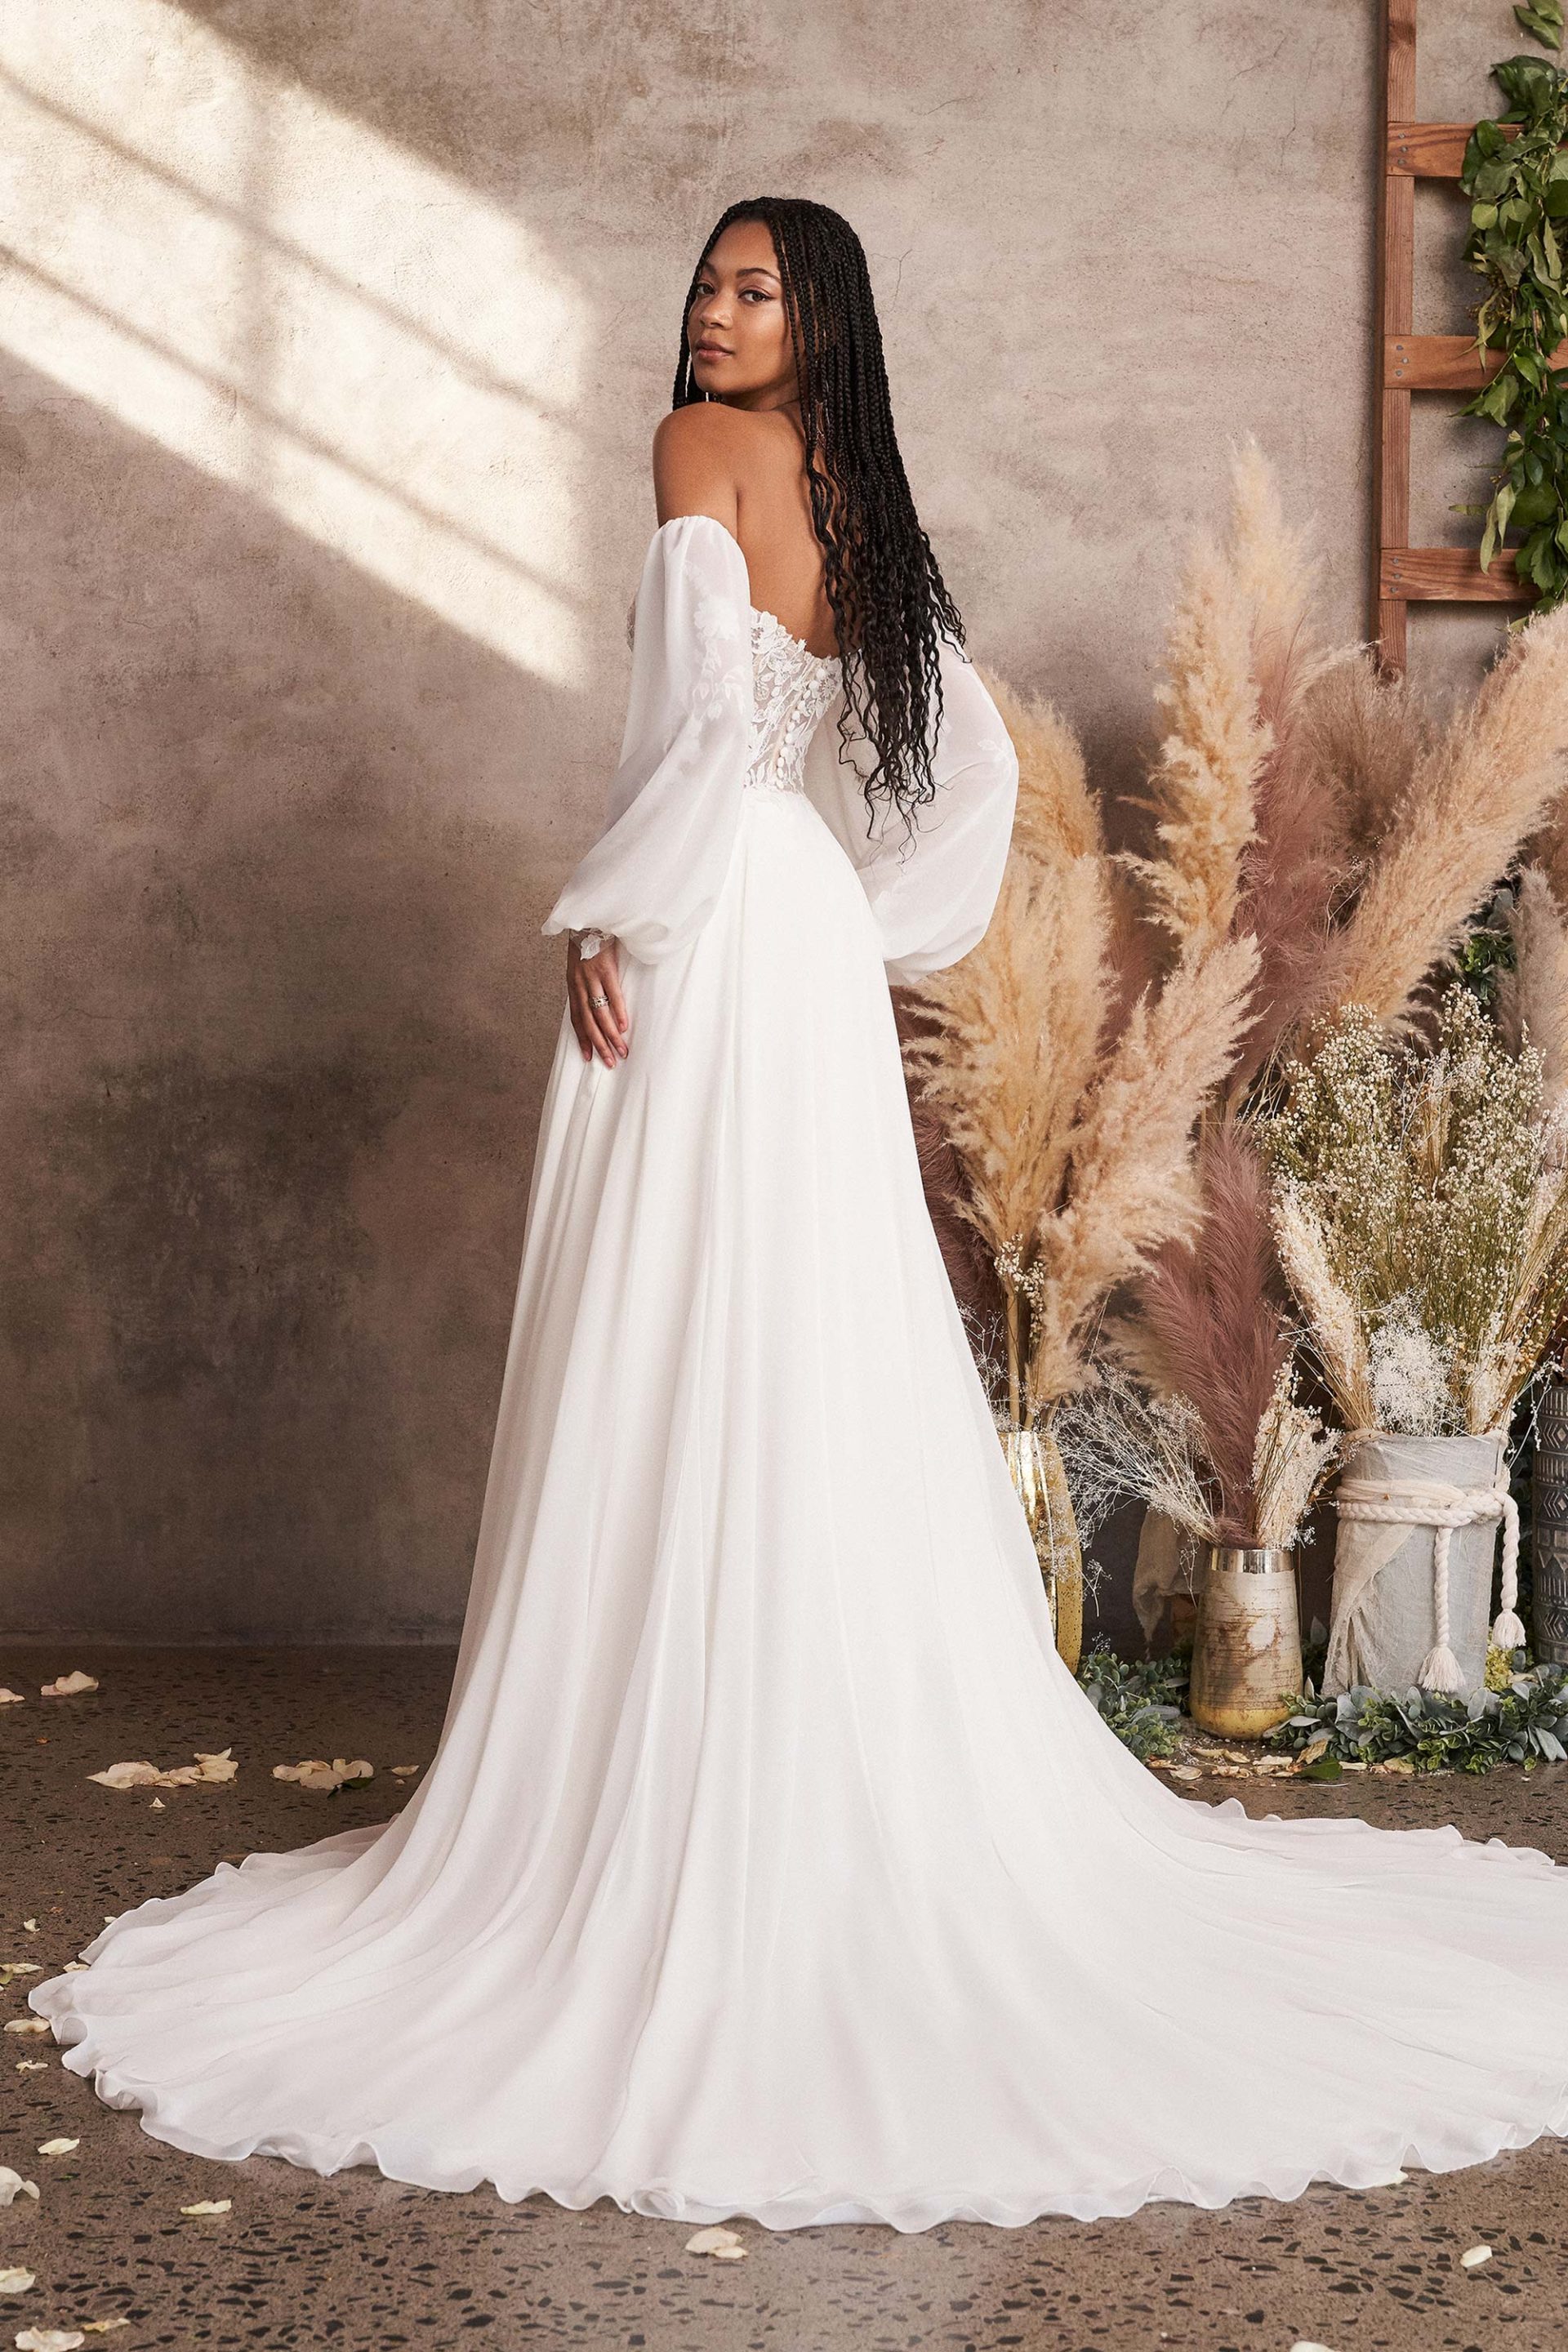 Chiffon A-Line Dress with Blouson Sleeves by Lillian West at K&B Bridals bridal shop in Bel Air Maryland